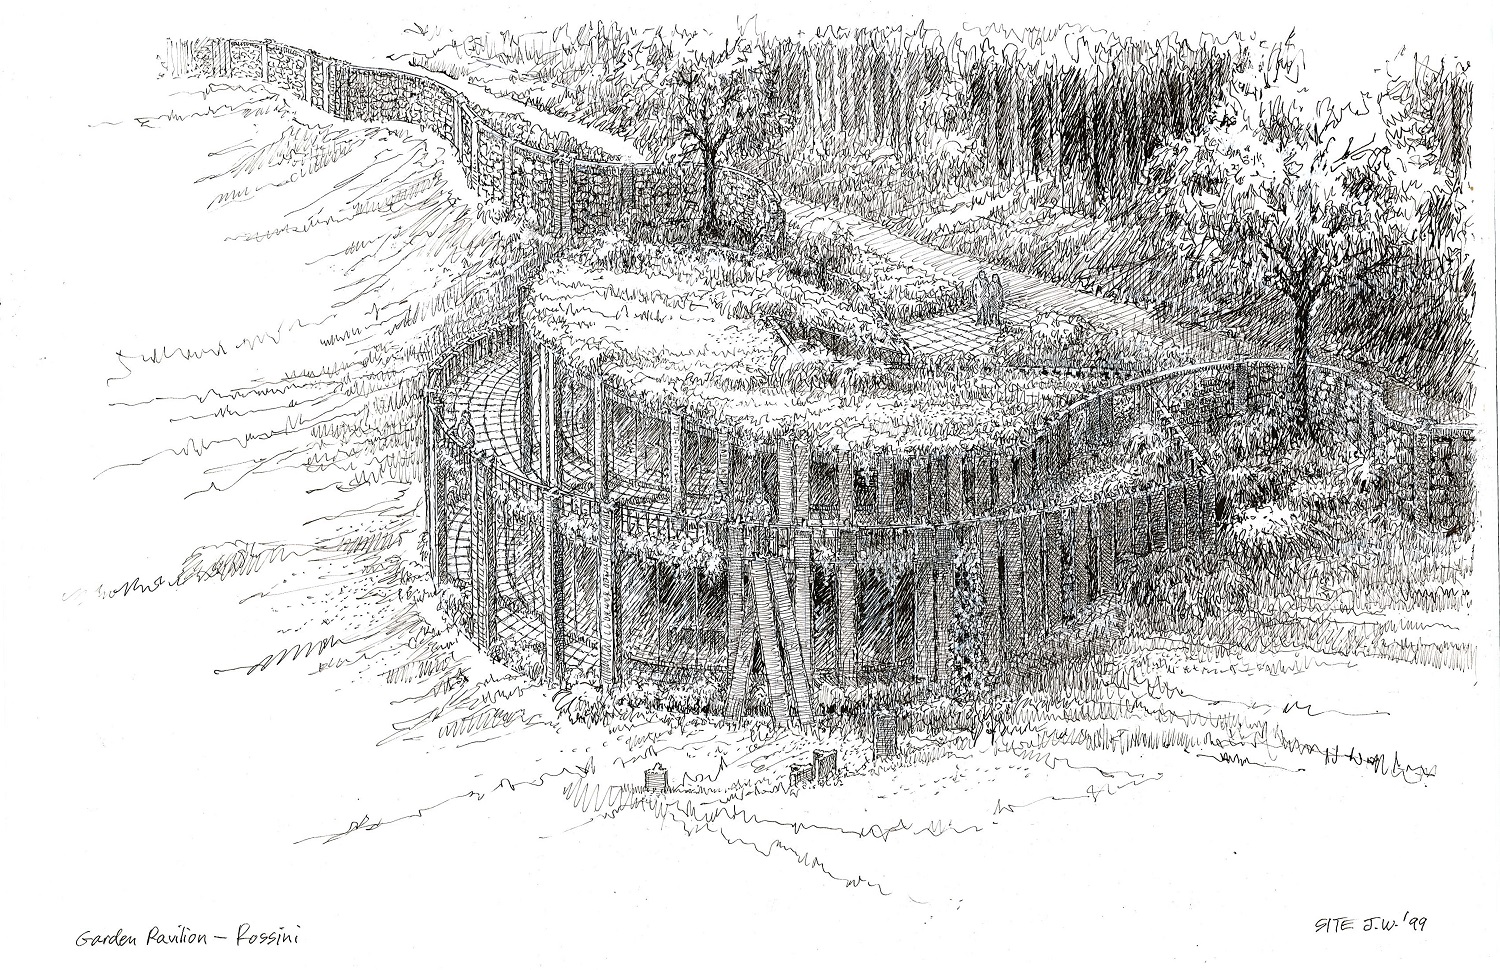 Ink on paper axonometric drawing of Garden Pavilion Rossini